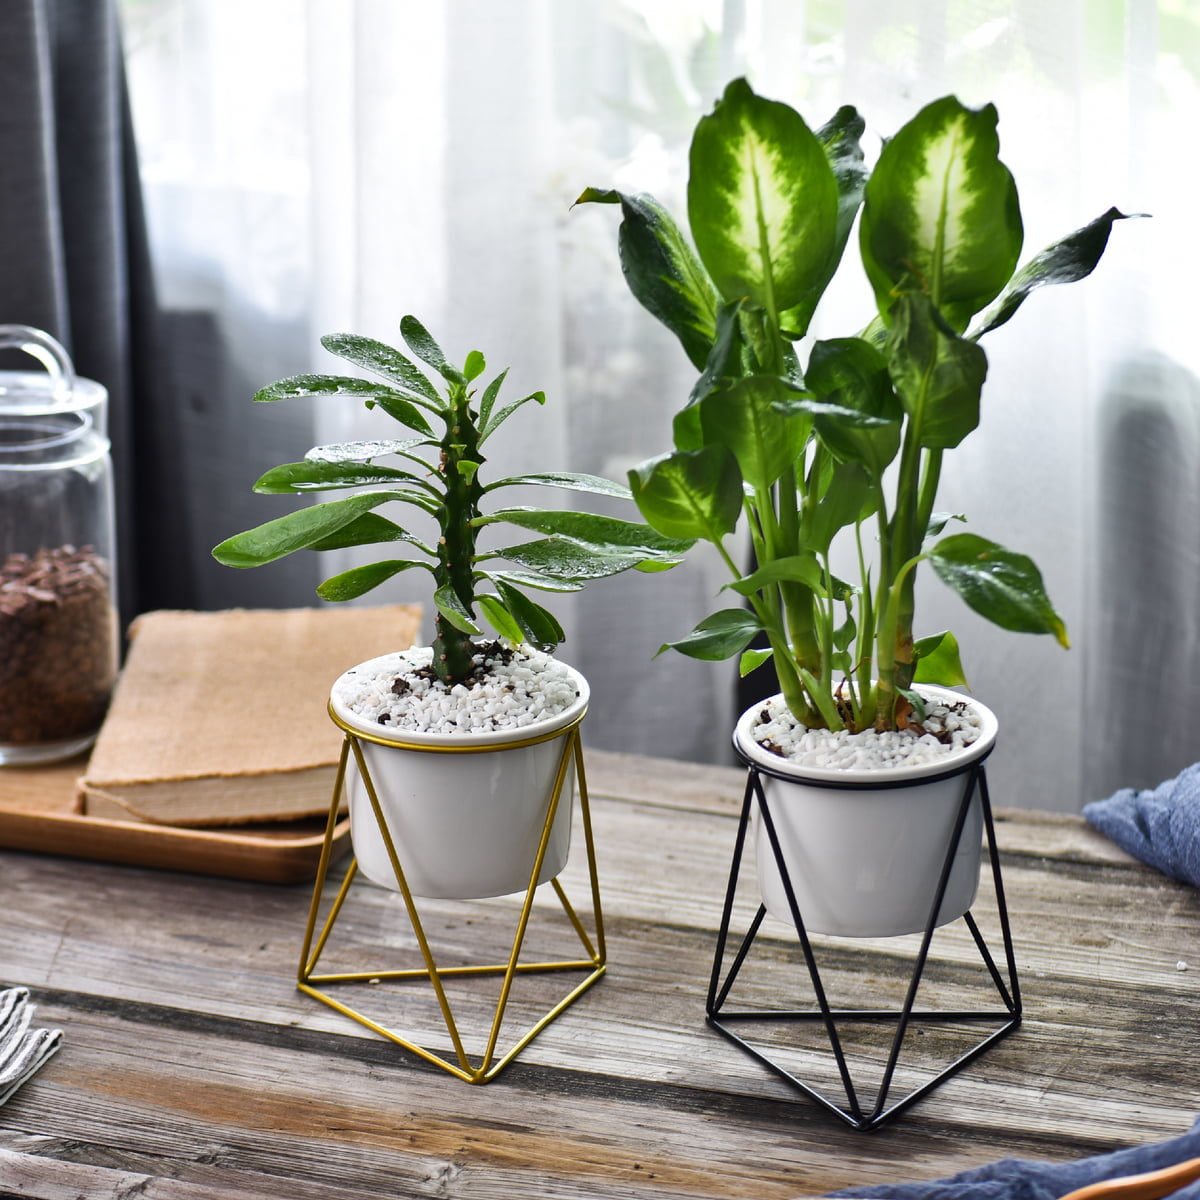 for Indoor and Outdoor Sunlit Set of 4 Geometric Mini Iron Tabletop Potted Plant Stand for Succulent Modern Plant Holder Plant Rack Decorative 4 Tiered Black Metal Planter Stands with Bronze Pots 